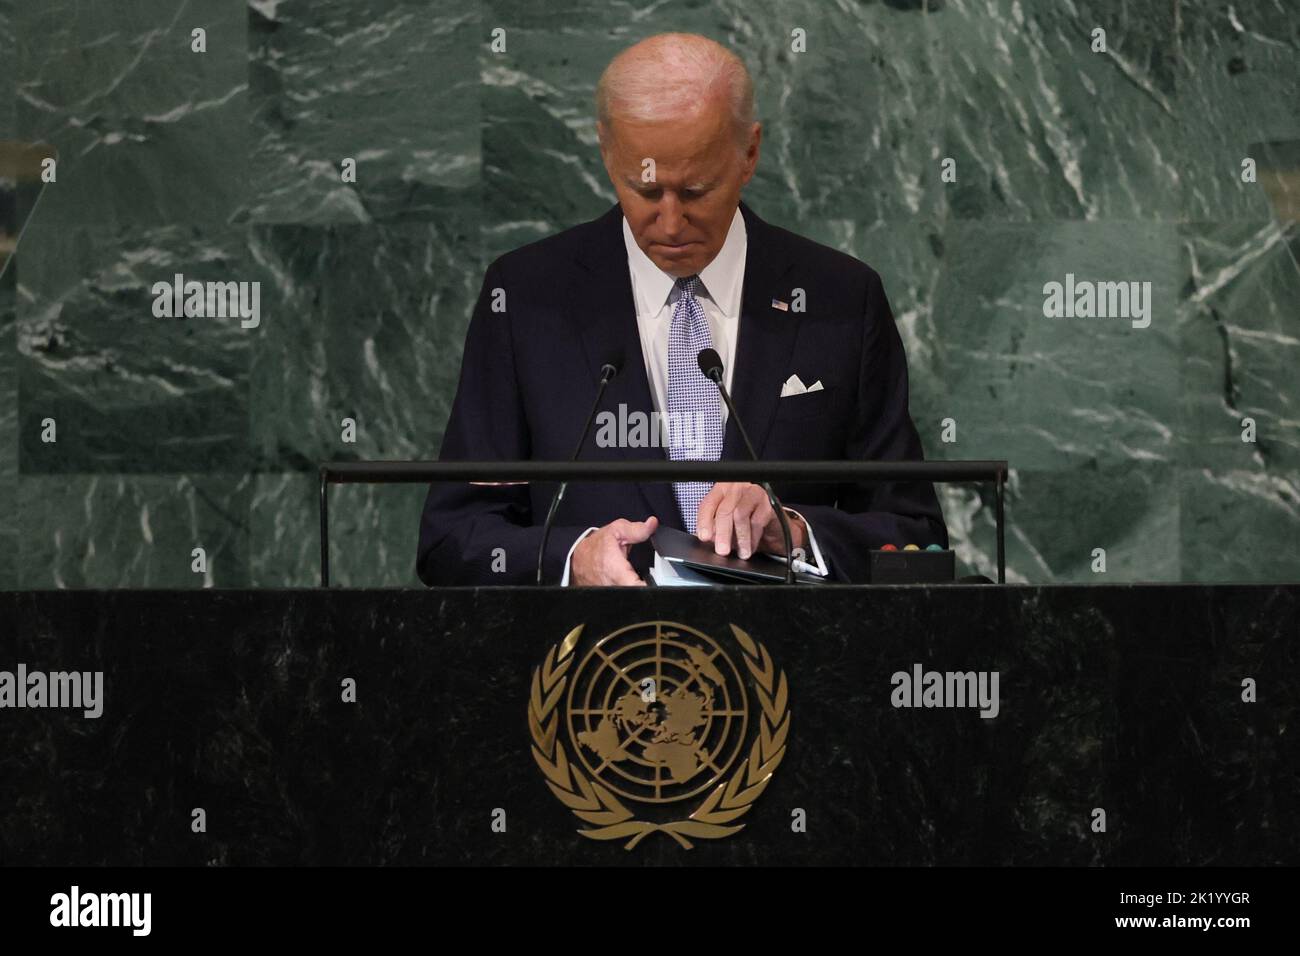 U.S. President Joe Biden concludes his address to the 77th Session of the United Nations General Assembly at U.N. Headquarters in New York City, U.S., September 21, 2022. REUTERS/Brendan McDermid Stock Photo